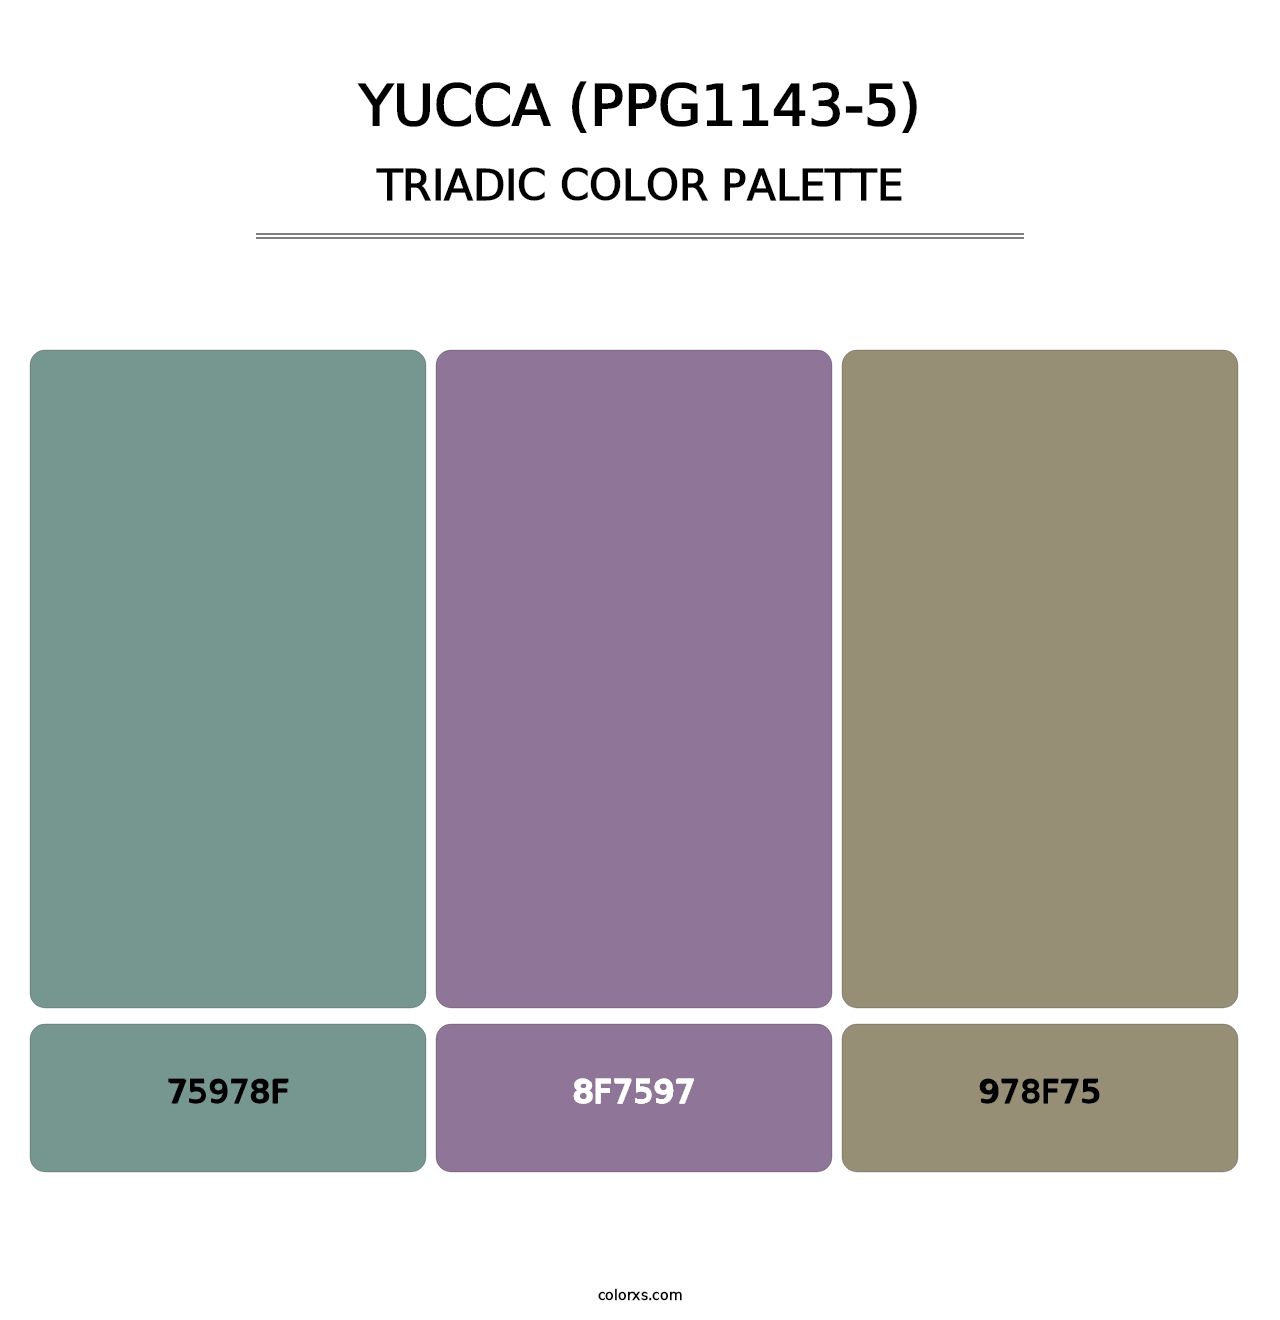 Yucca (PPG1143-5) - Triadic Color Palette